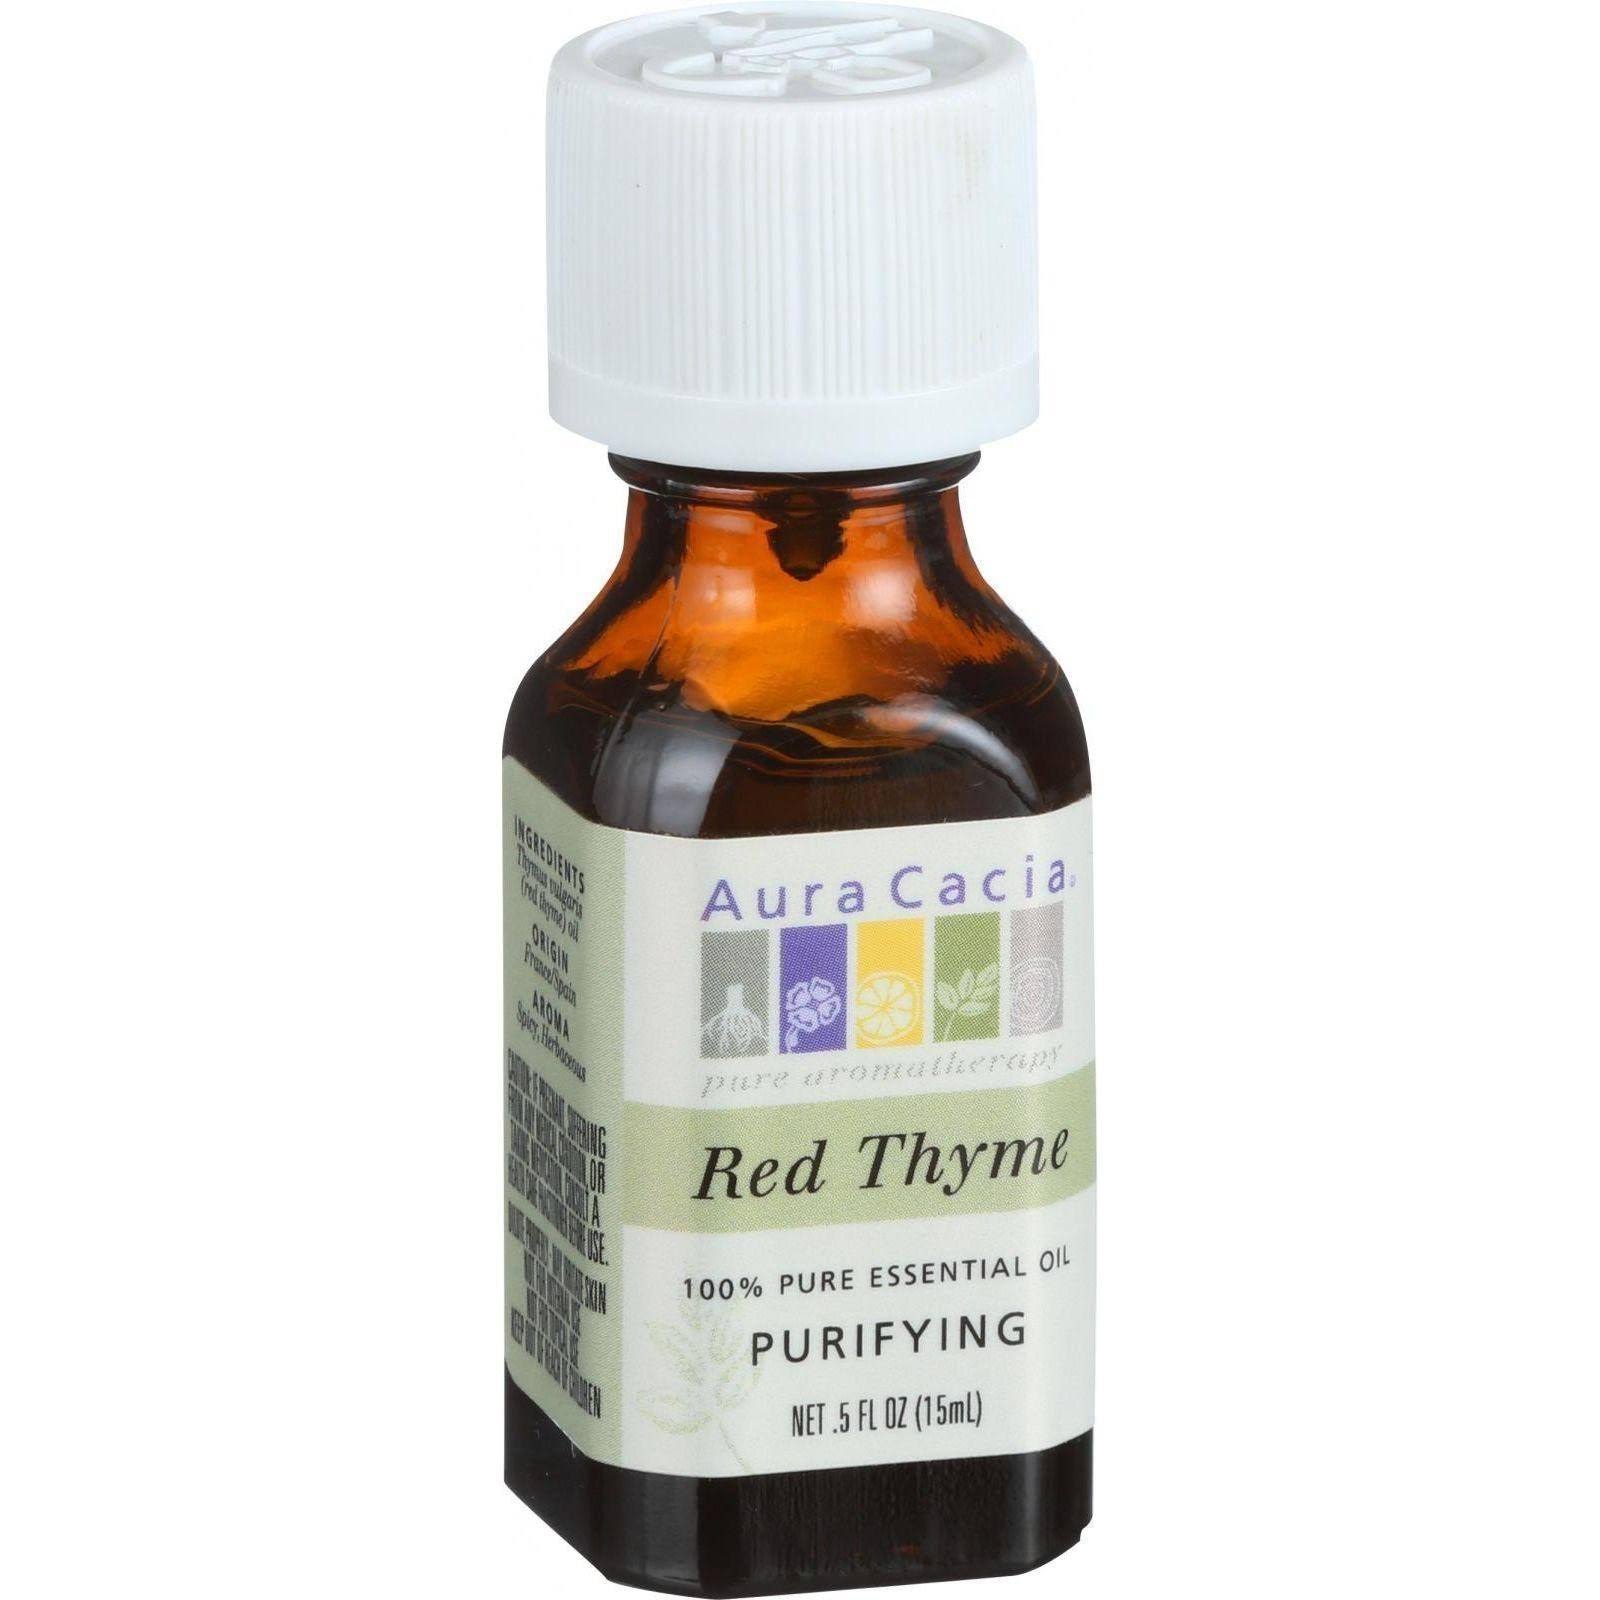 Aura Cacia 100% Pure Essential Oil - Red Thyme, Purifying, 0.5 oz